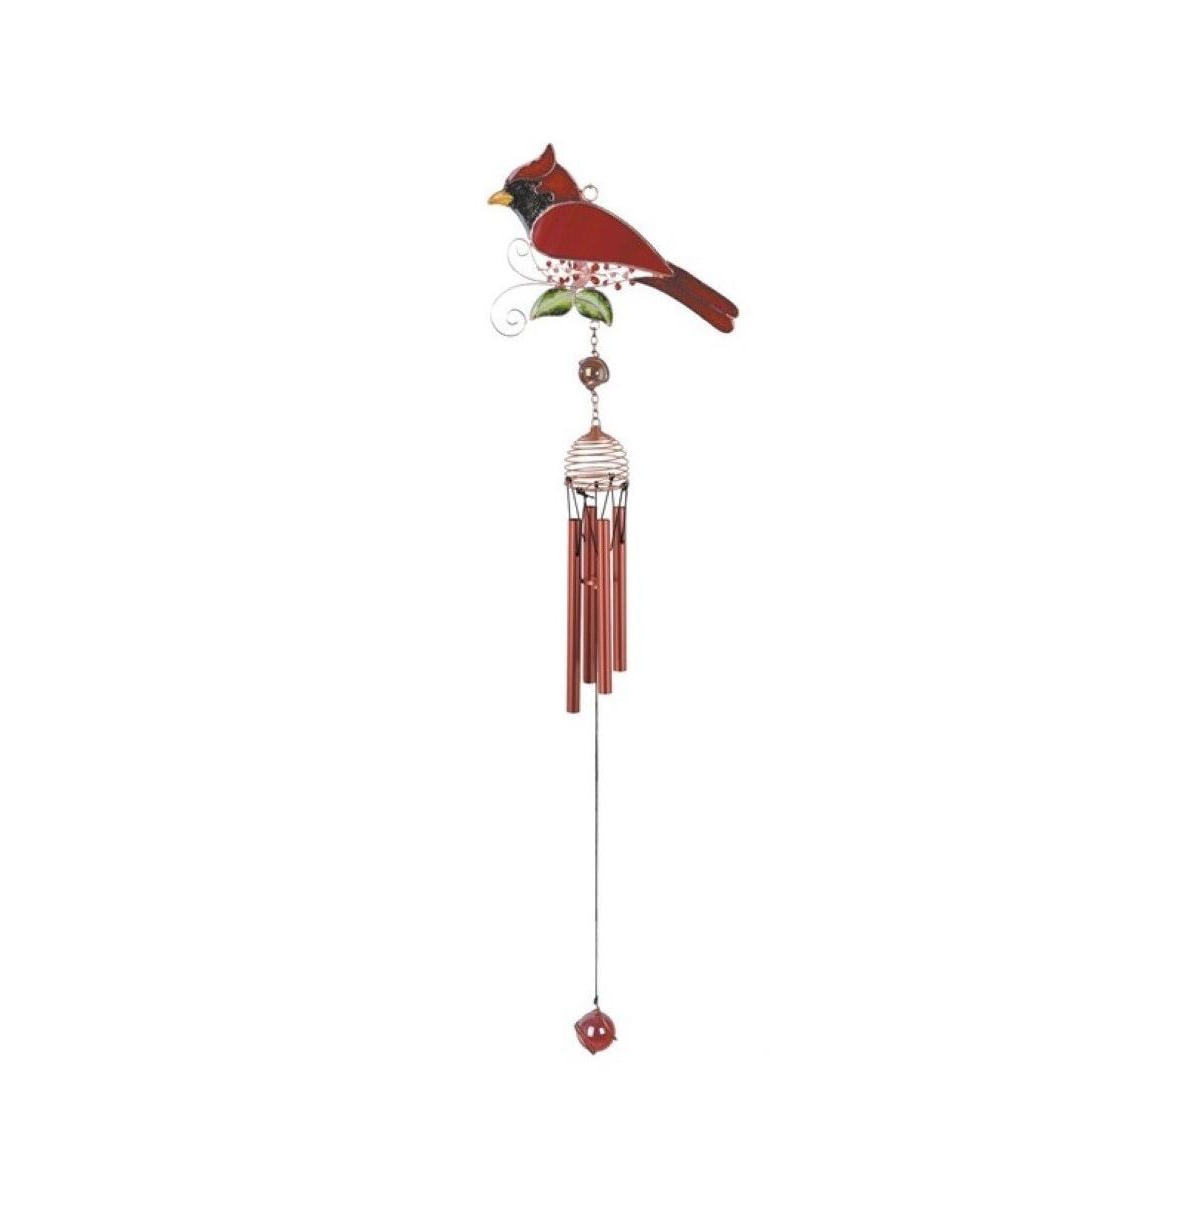 26" Long Northern Cardinal Wind Chime with Gem Home Decor Perfect Gift for House Warming, Holidays and Birthdays - Red